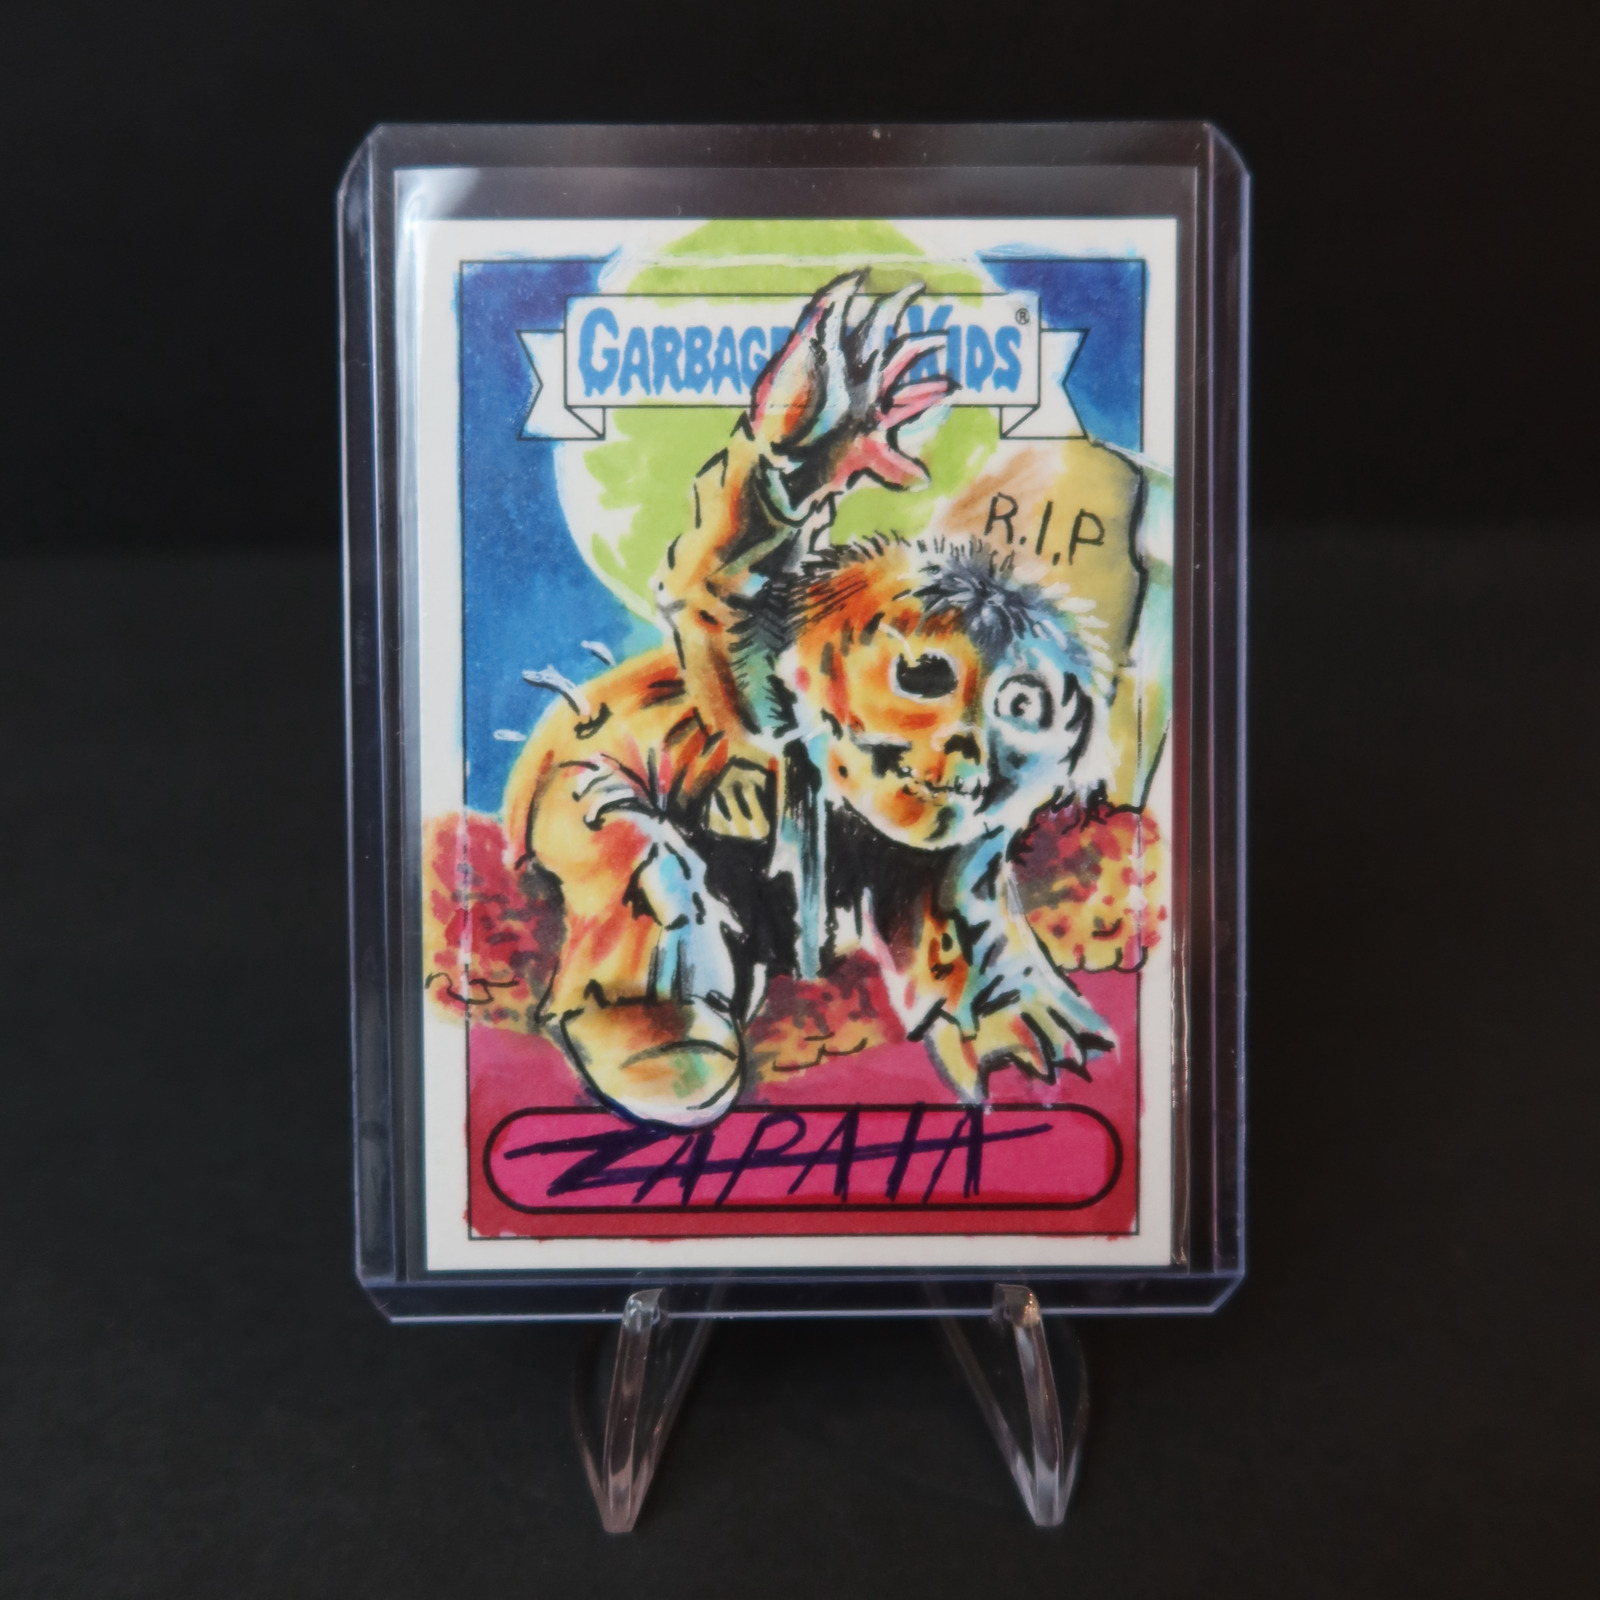 2013 GARBAGE PAIL KIDS BRAND-NEW SERIES 2 DEAD TED BY JEFF ZAPATA CS